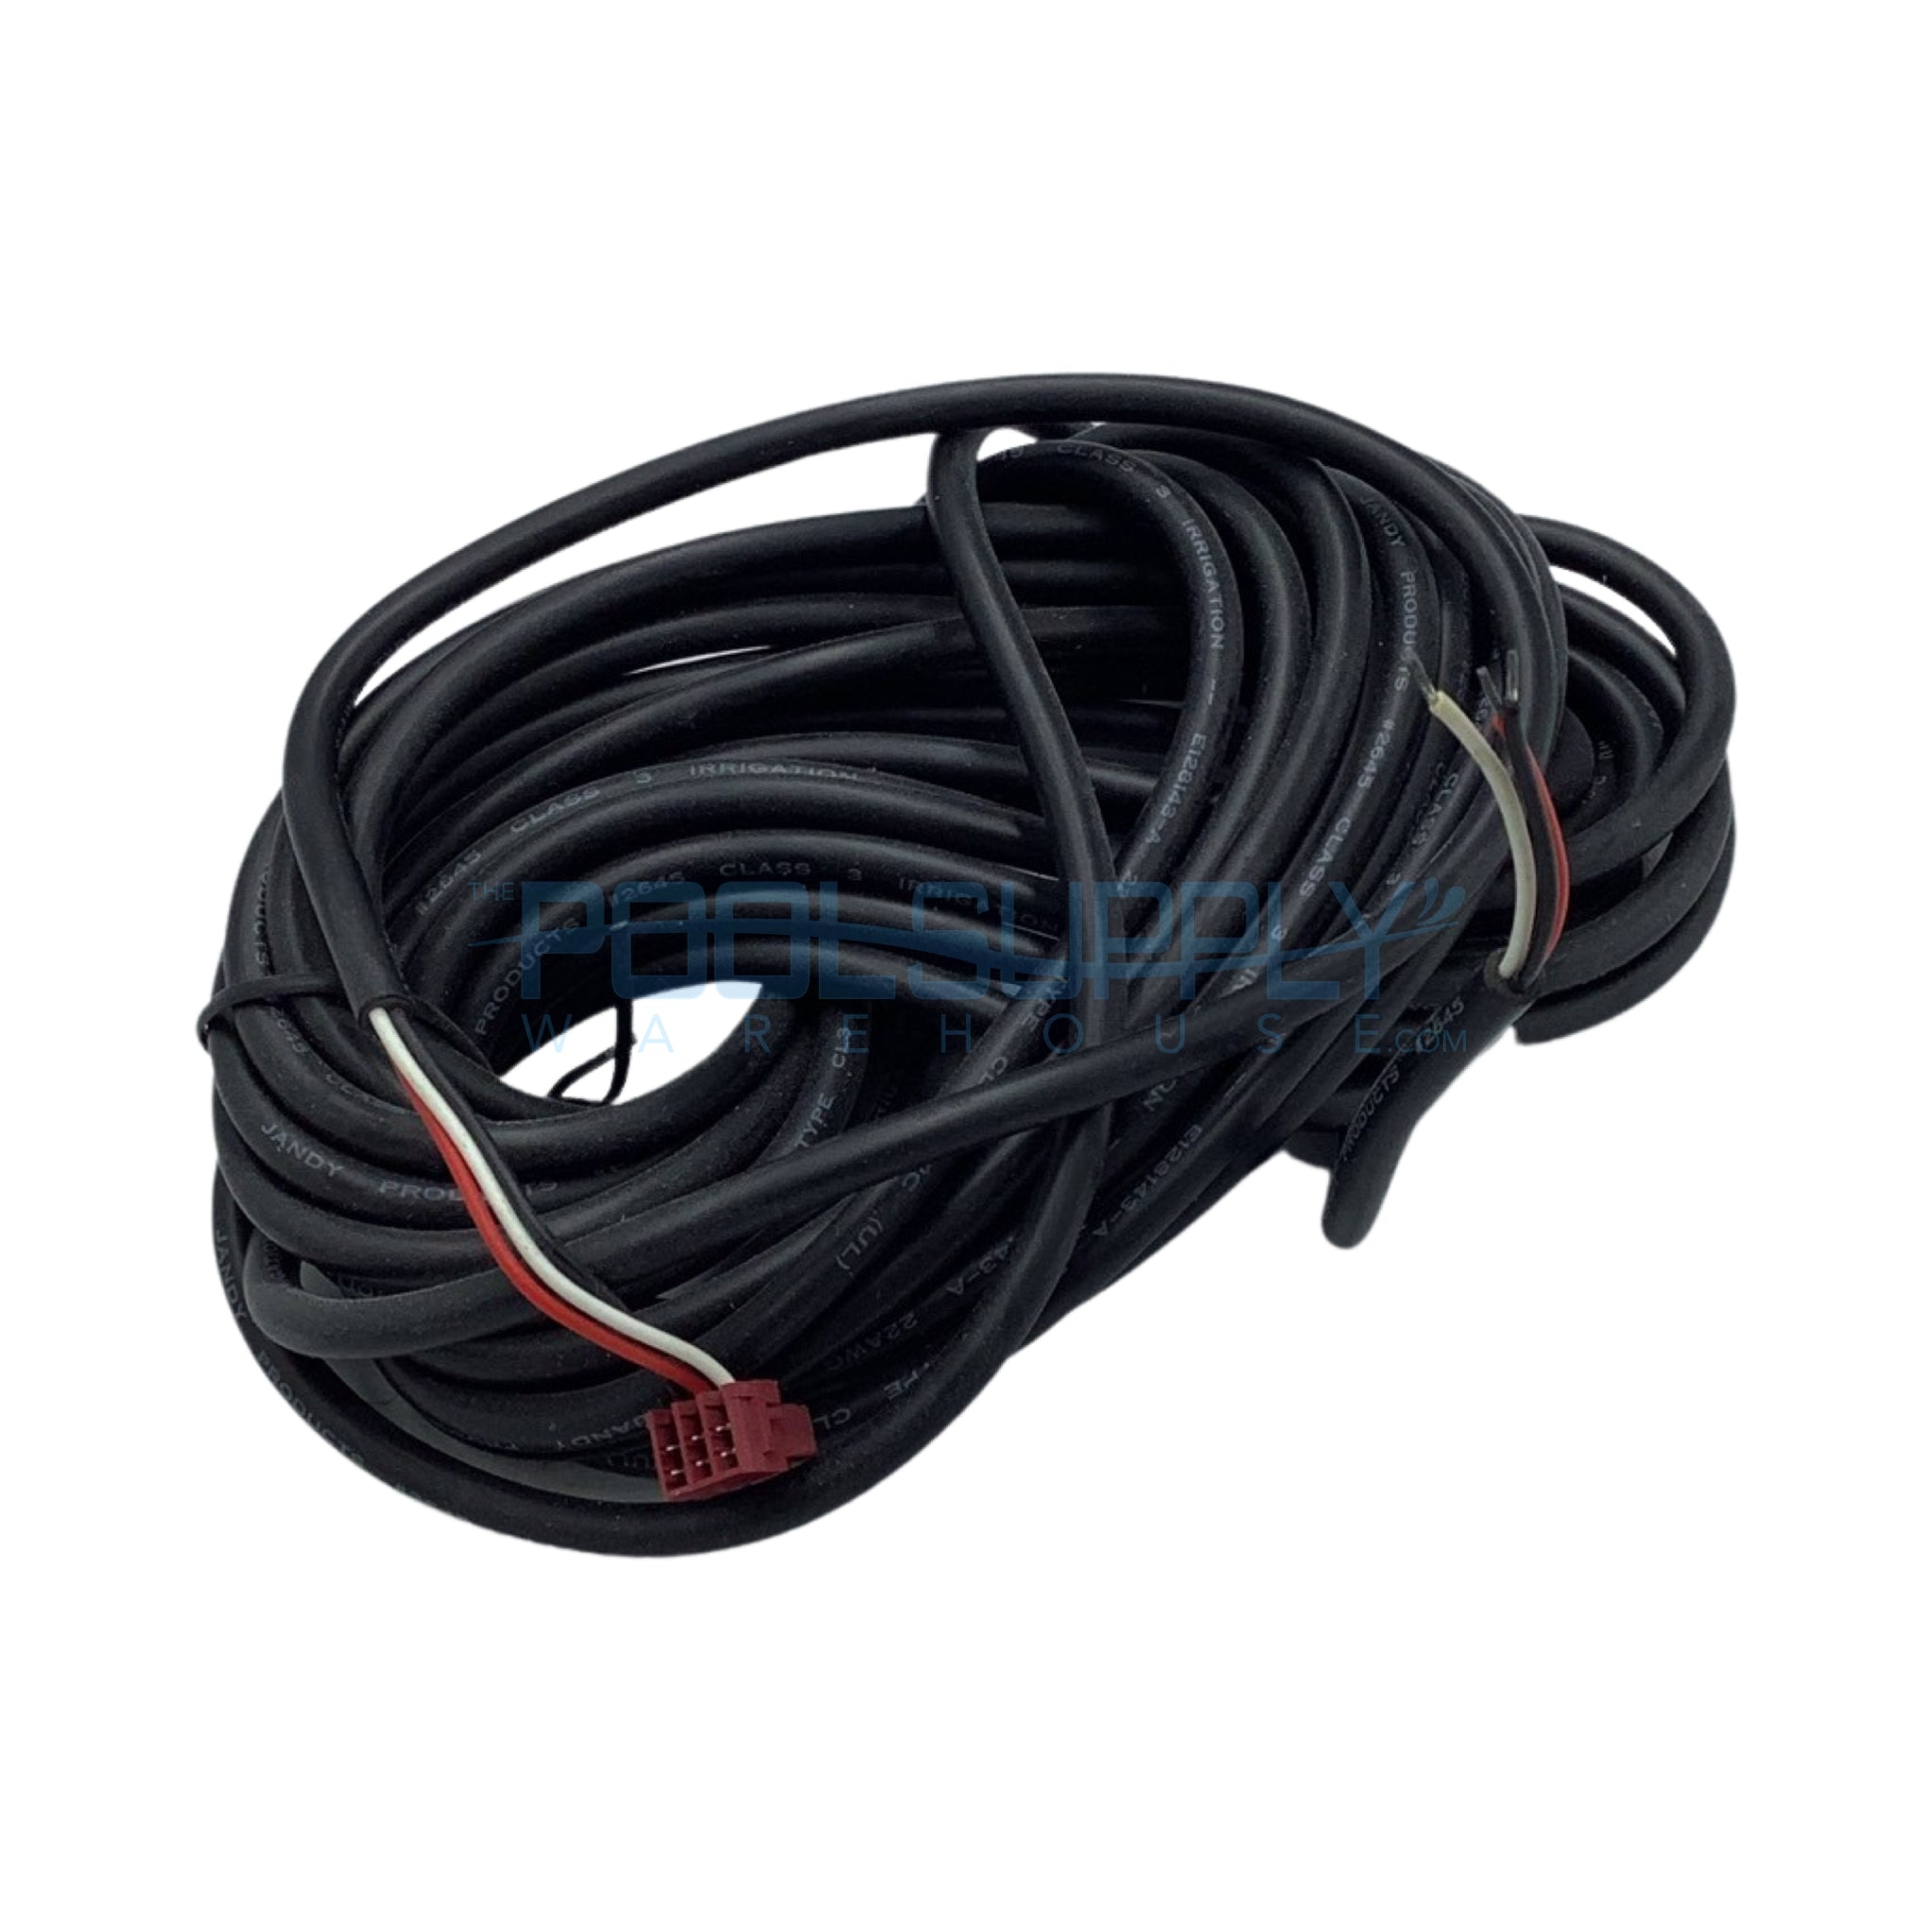 Zodiac 20' Cable Kit For 4424 Jandy Valve Actuators - R0411800 - The Pool Supply Warehouse